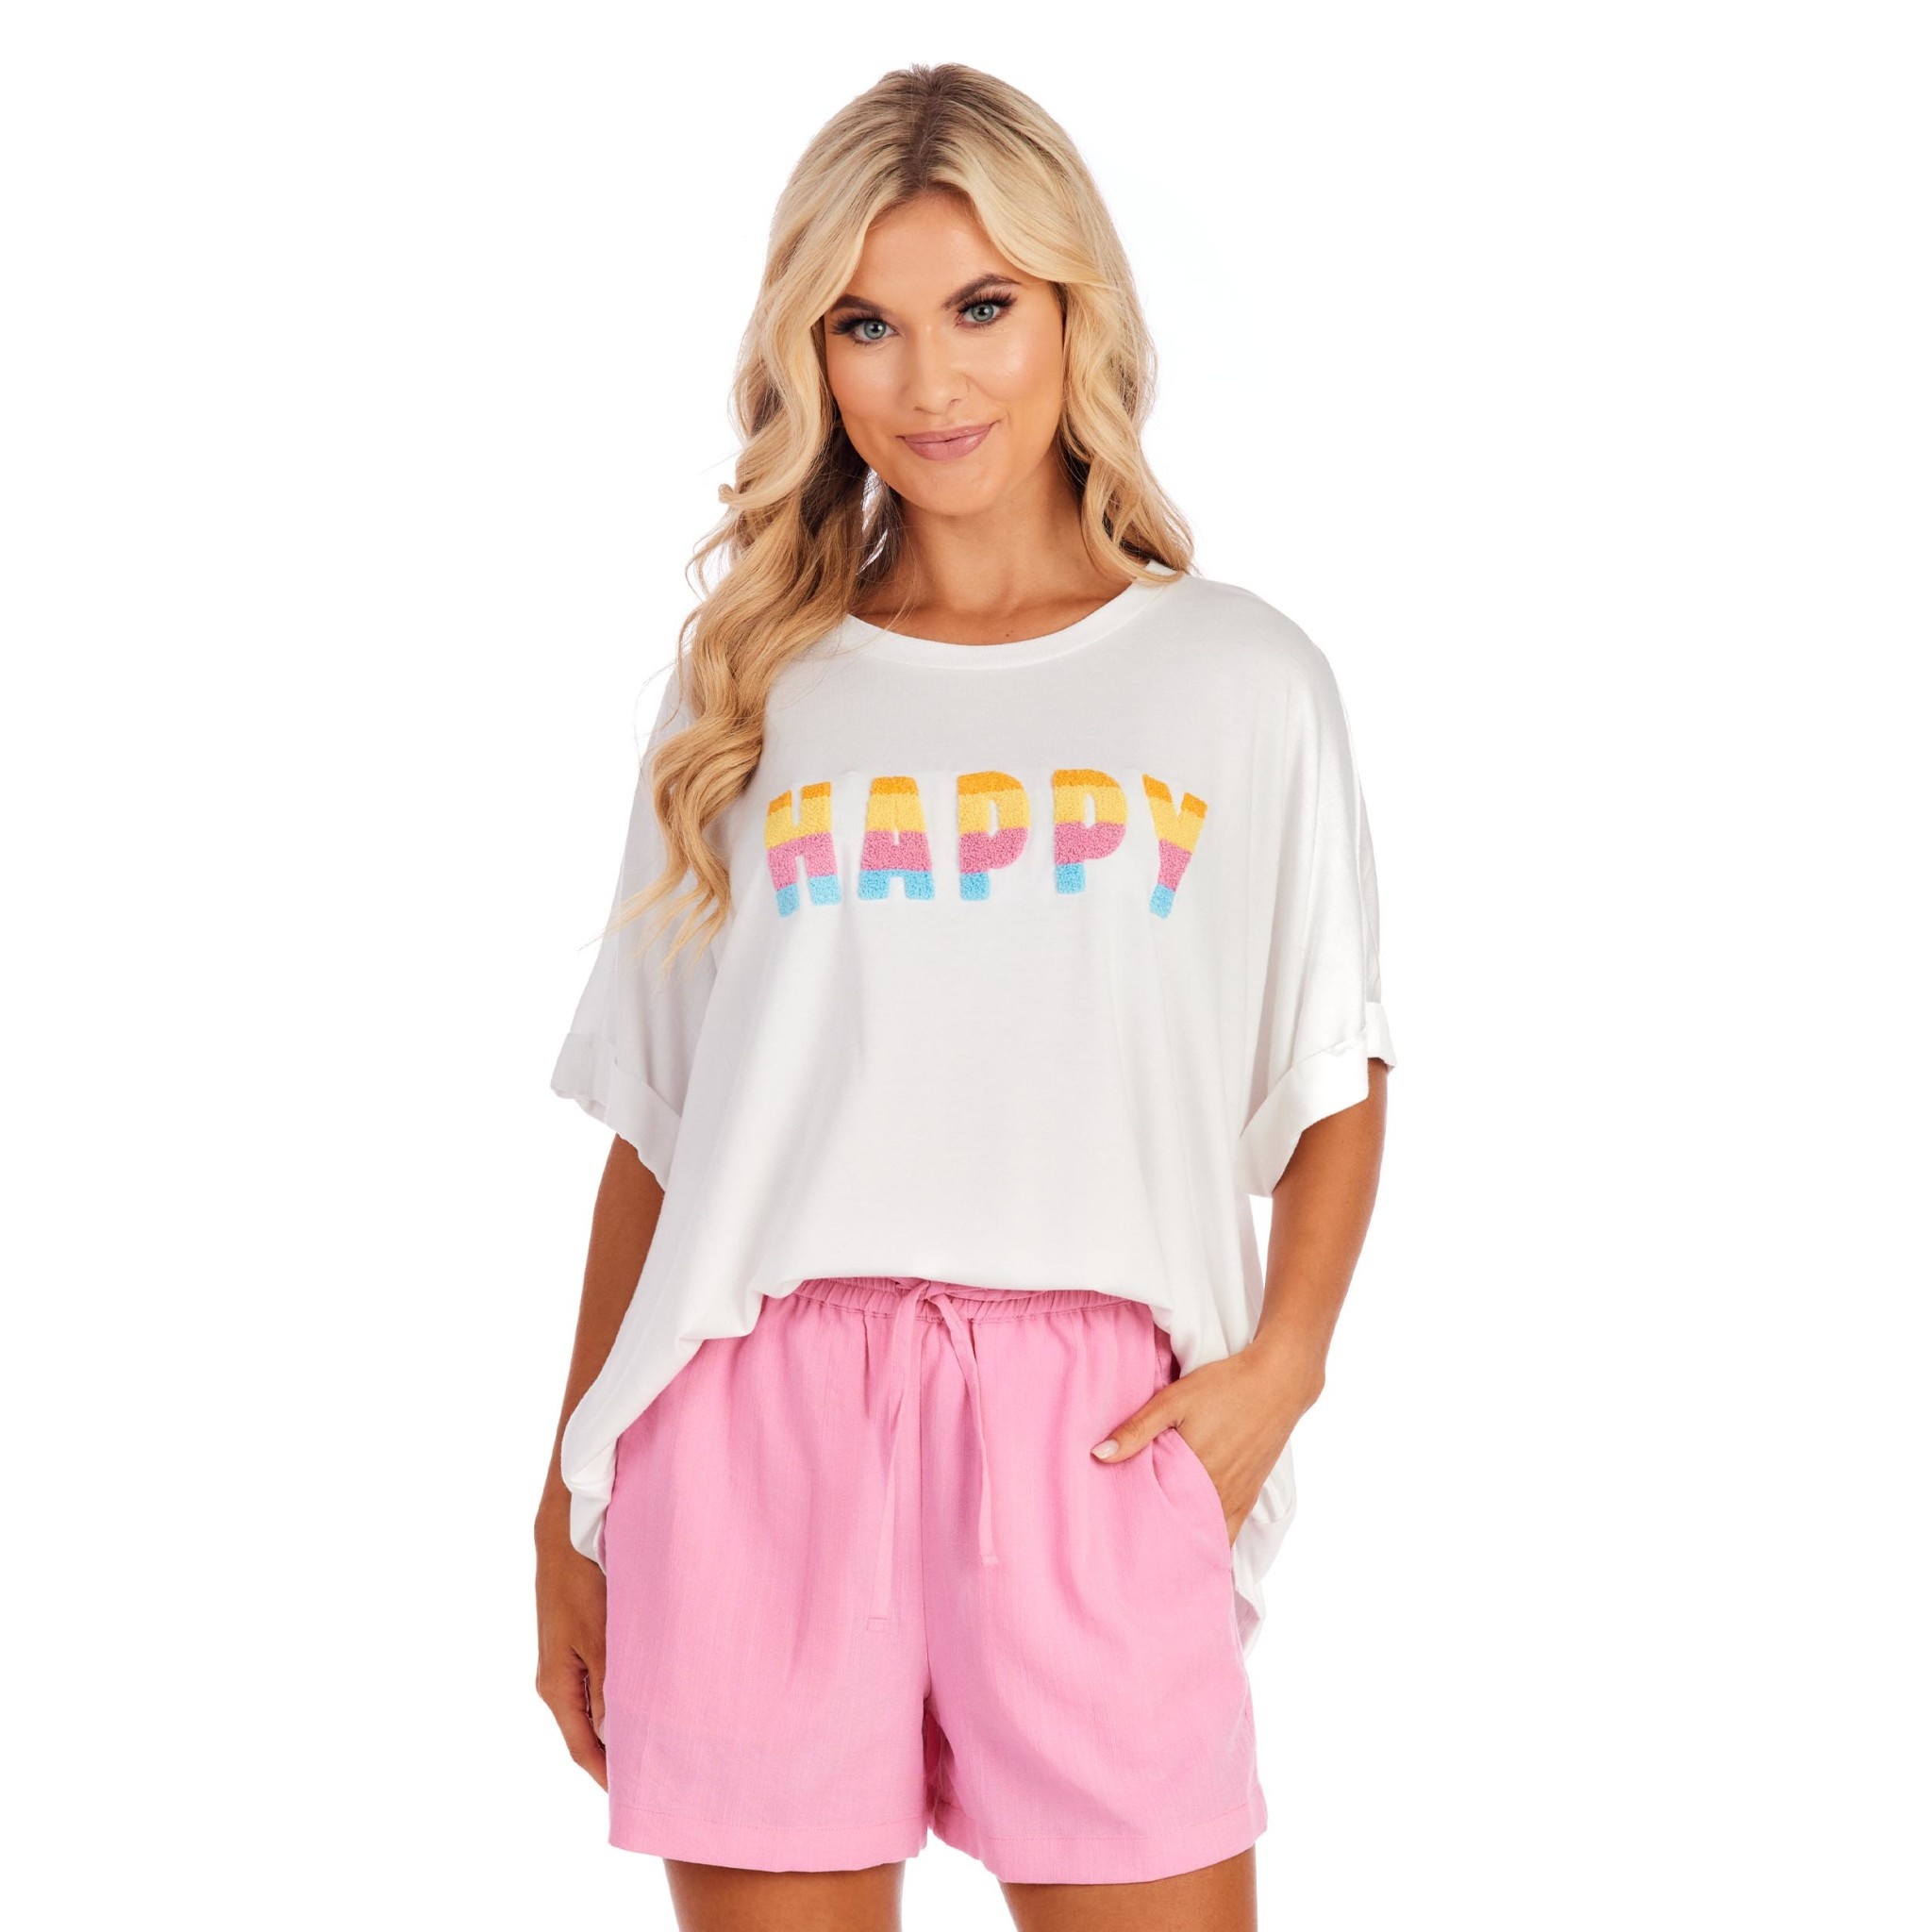 Mudpie White Nate Patch Tee: HAPPY (one size)